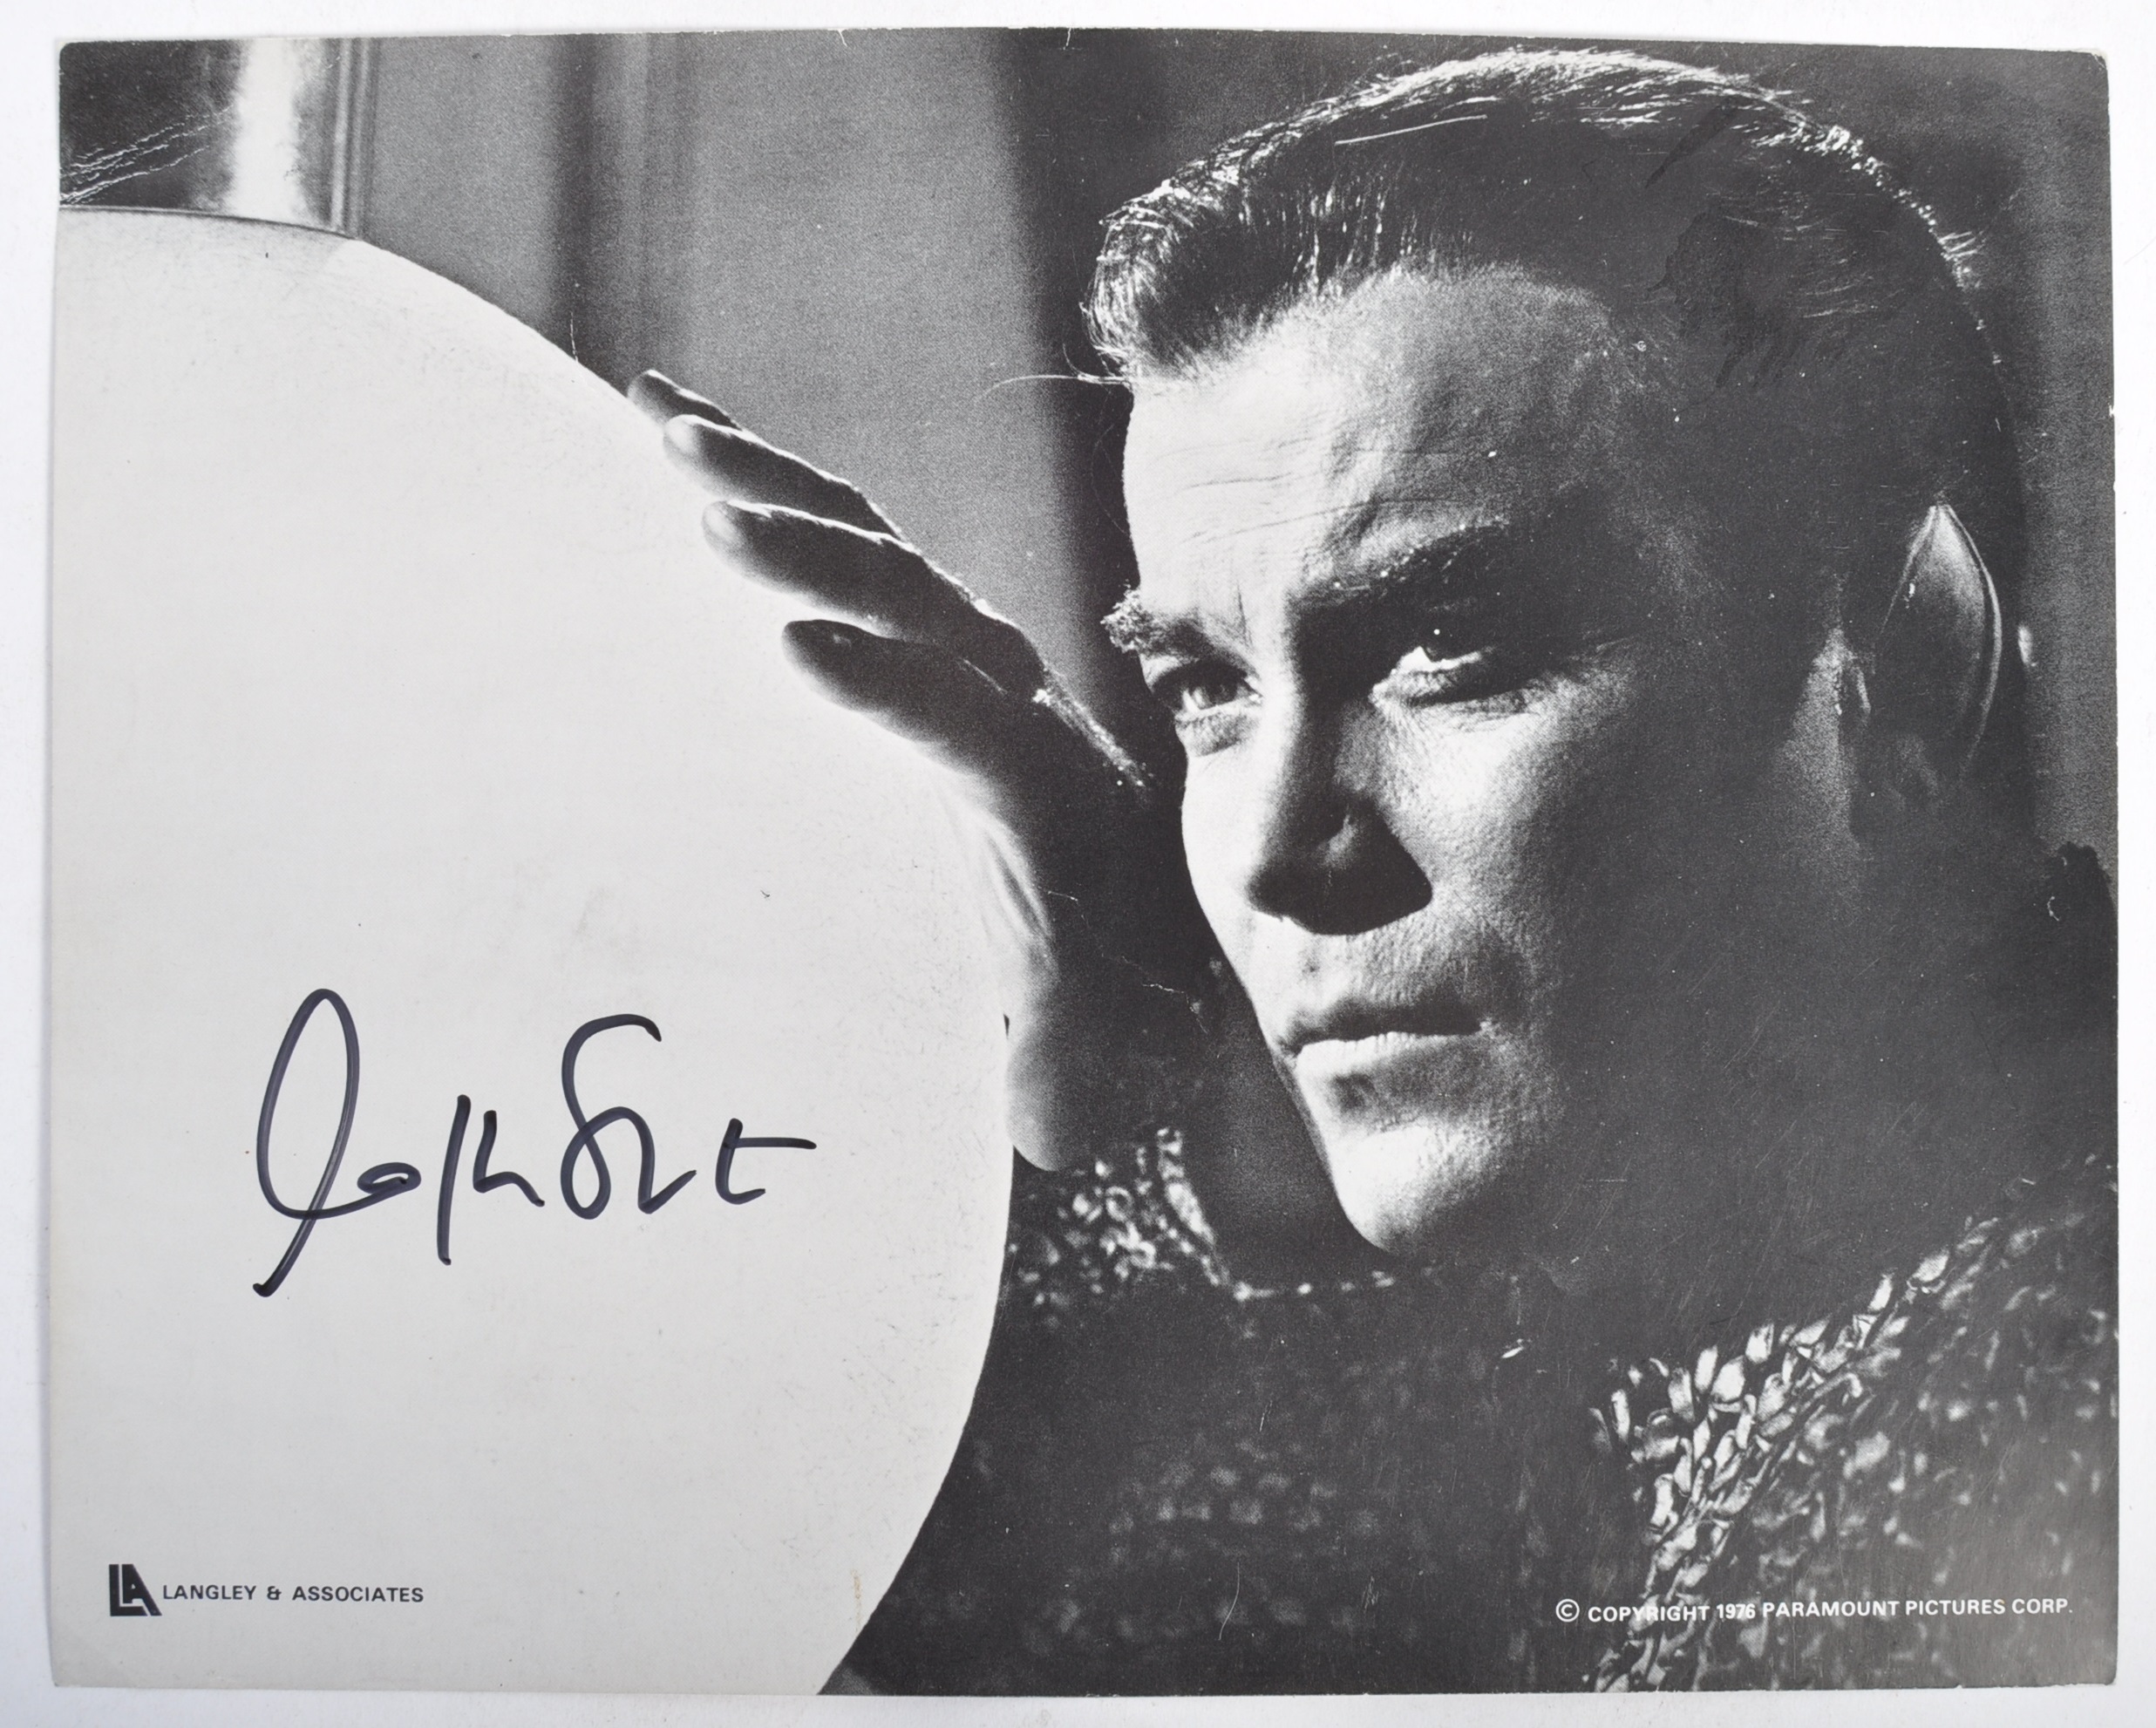 STAR TREK AUTOGRAPH COLLECTION - WILLIAM SHATNER SIGNED PHOTO